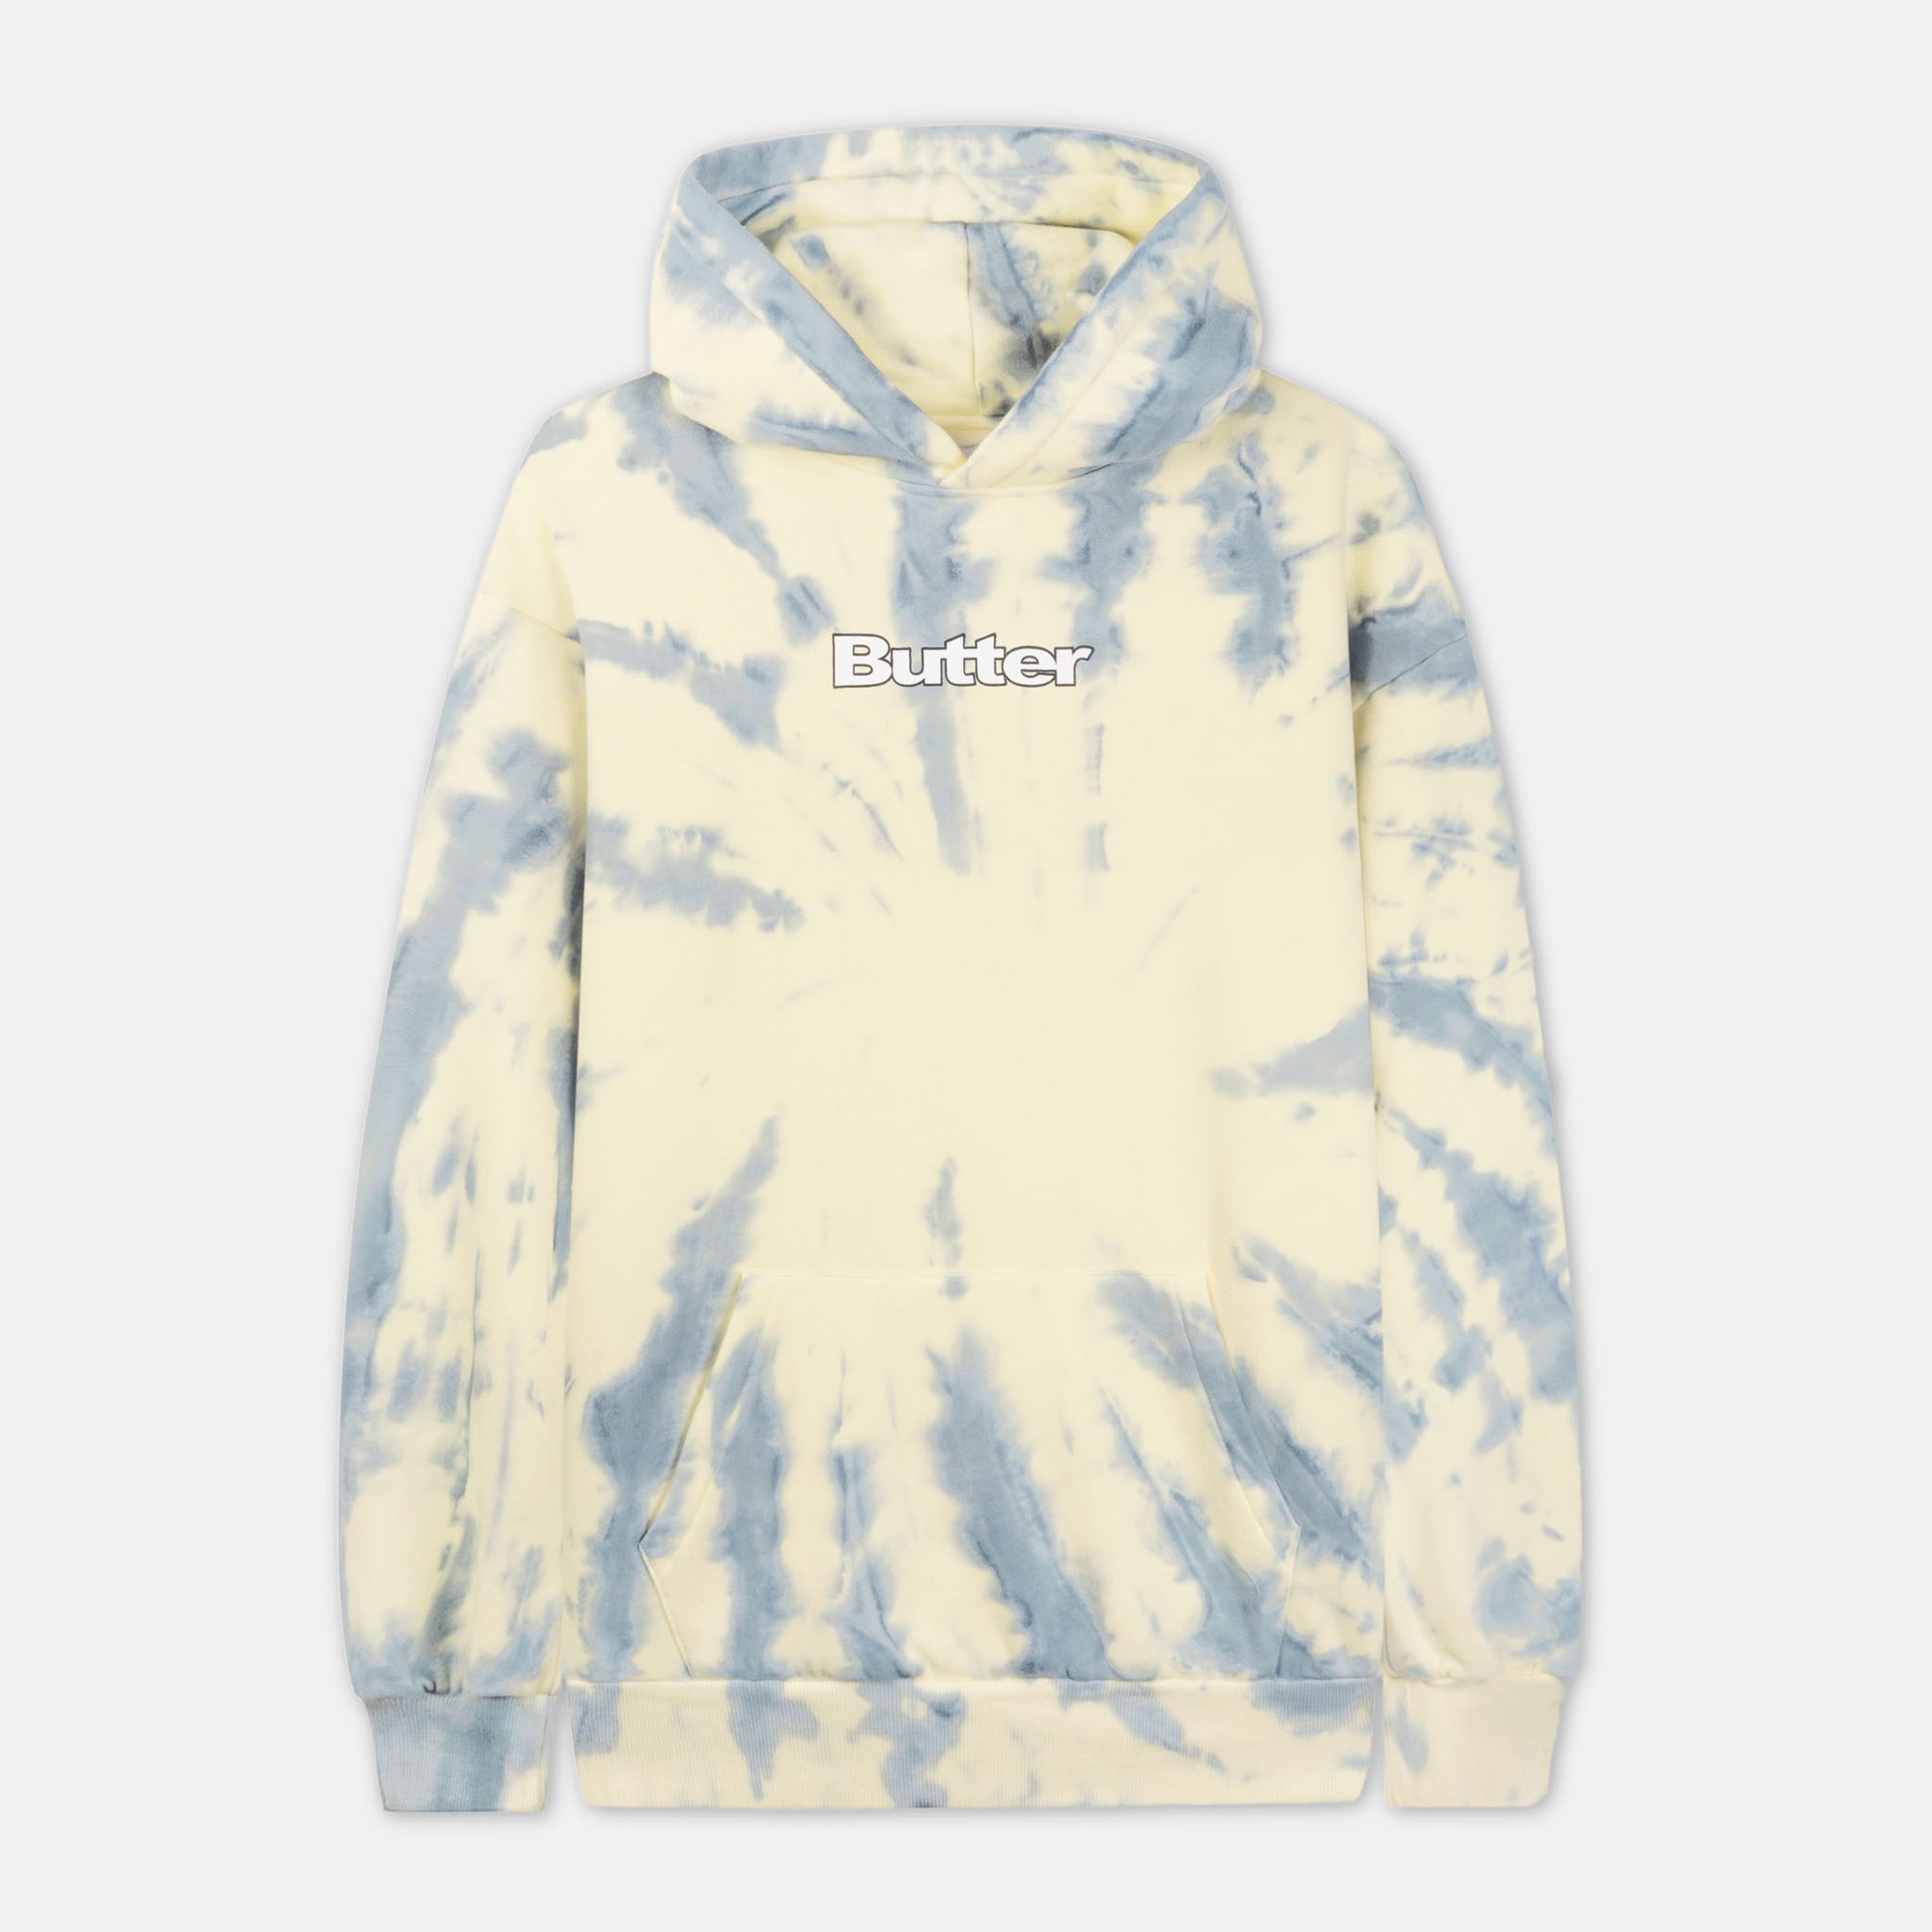 Butter Goods - Sight And Sound Pullover Hooded Sweatshirt - Tie Dye